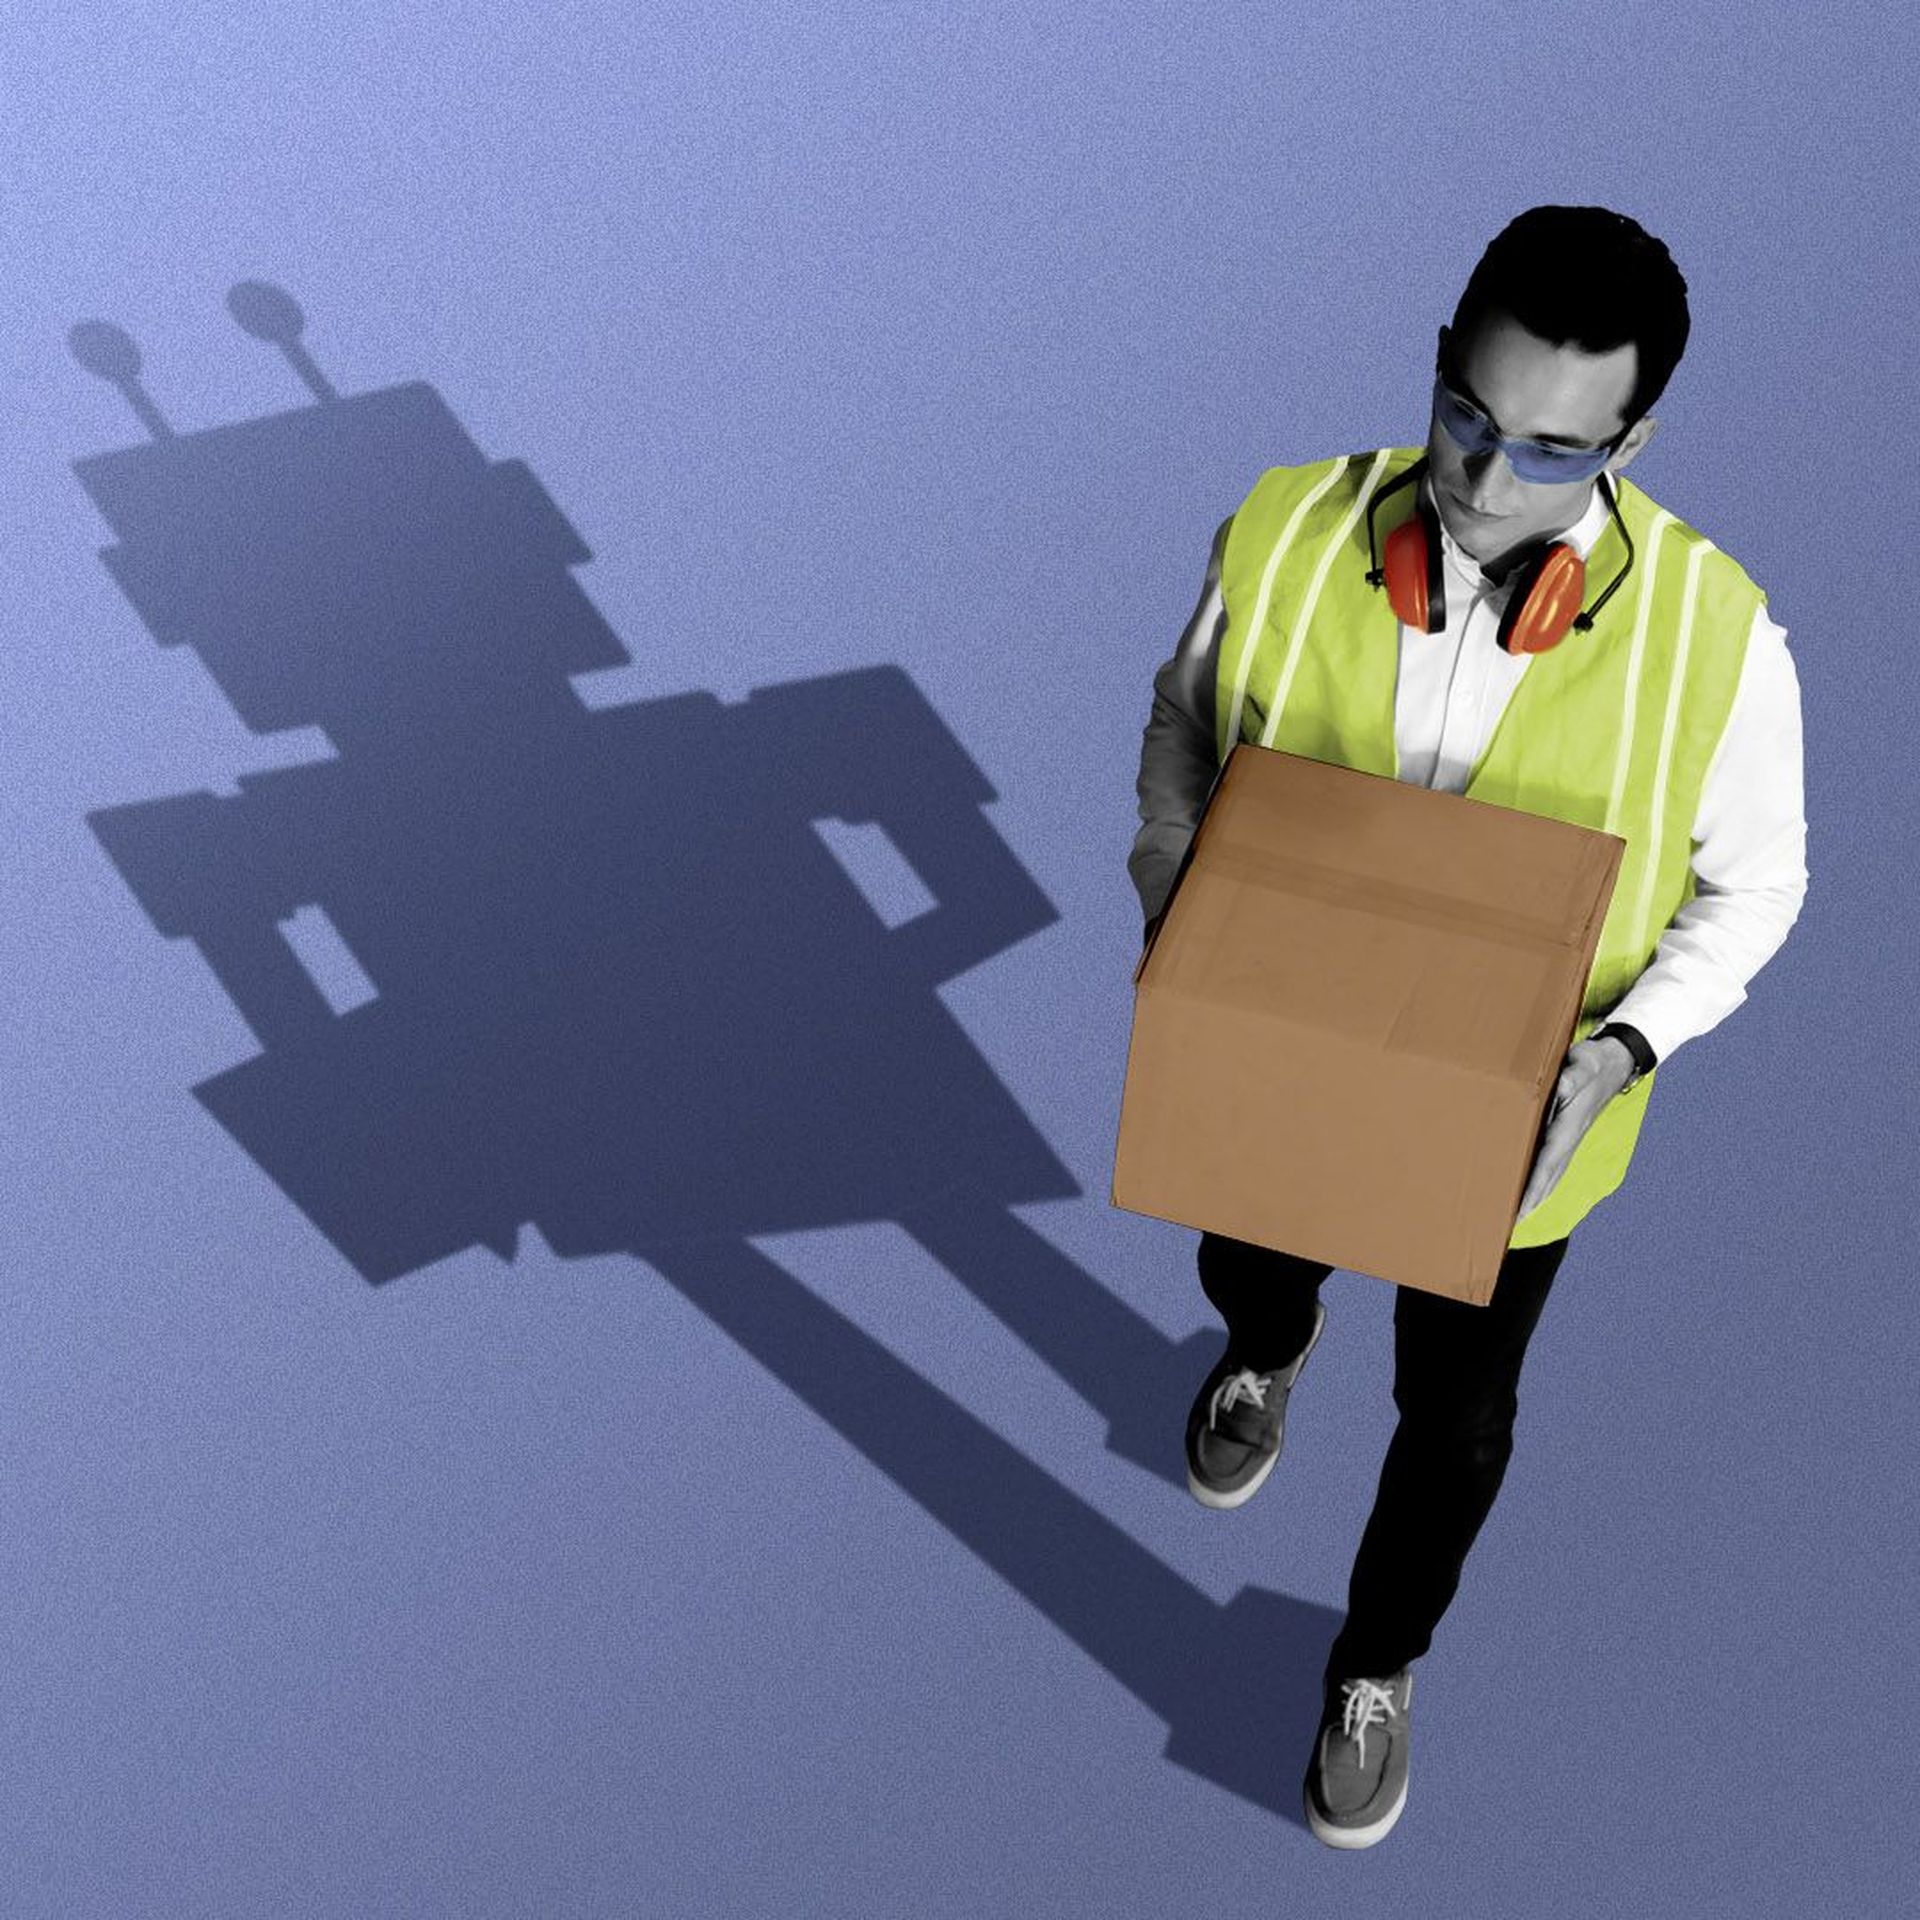 Illustration of a warehouse worker casting a shadow of a robot